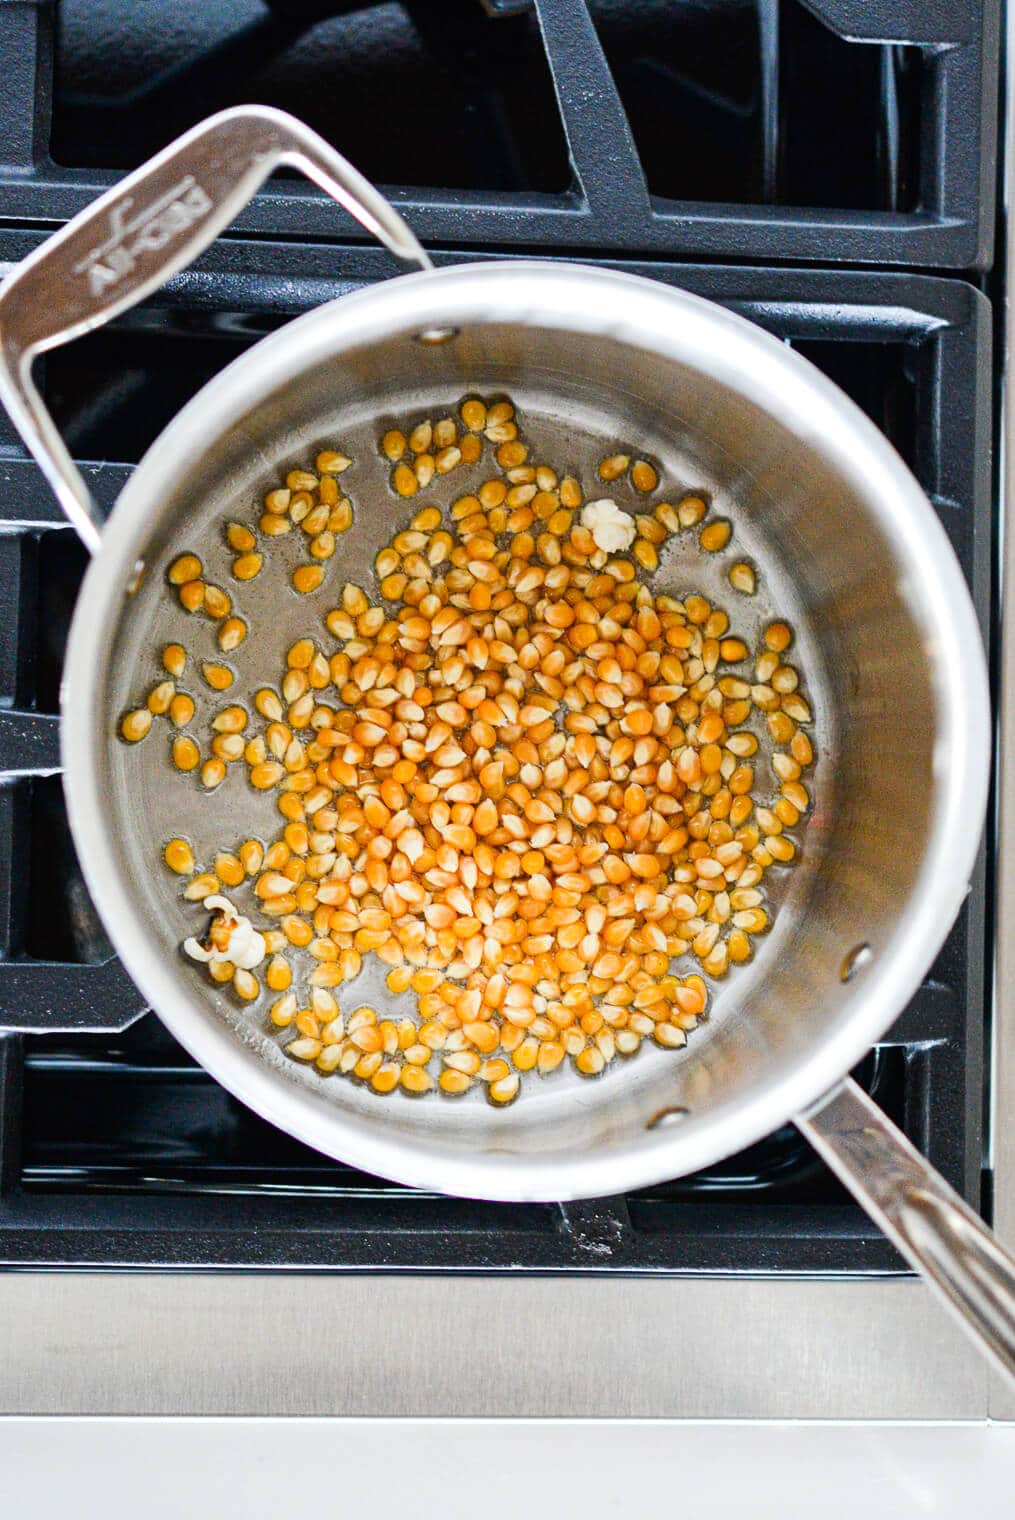 Stainless steel pot with popcorn kernels and oil sitting on stovetop